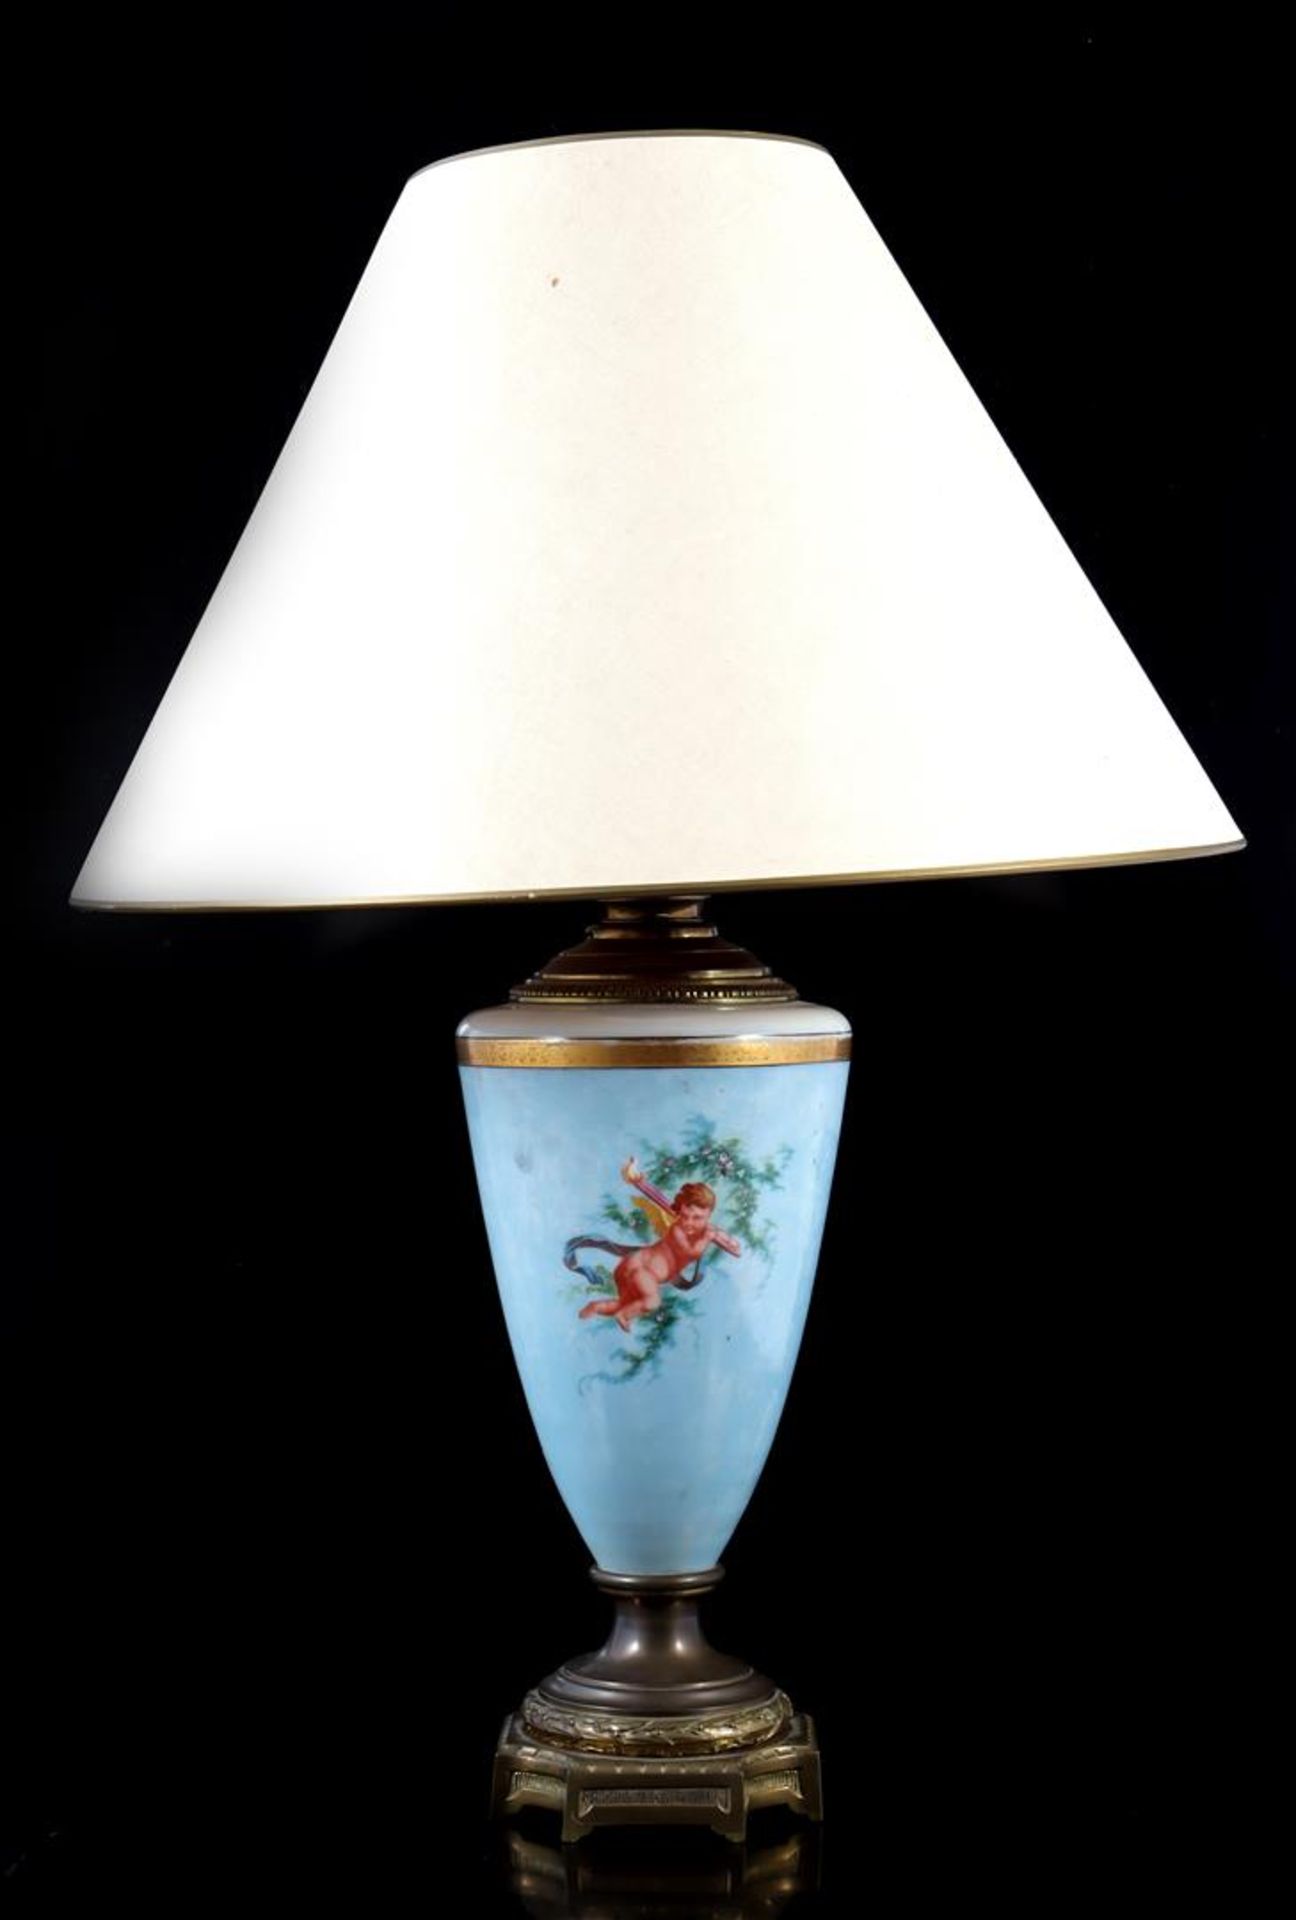 Classic table table lamp